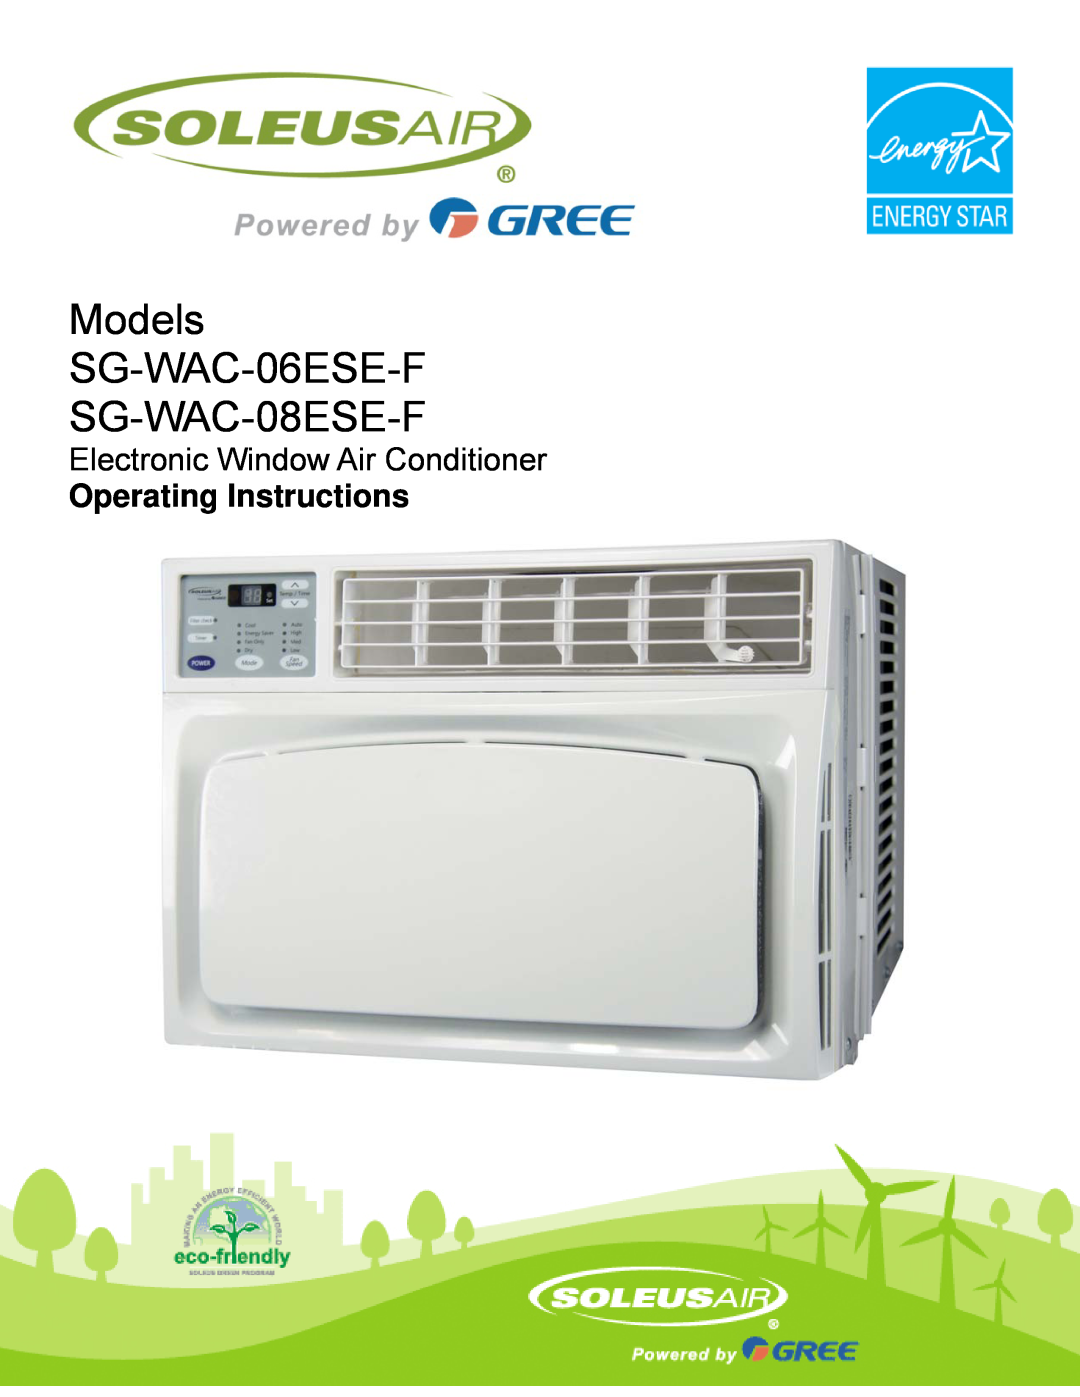 Soleus Air operating instructions Models SG-WAC-06ESE-F SG-WAC-08ESE-F, Electronic Window Air Conditioner 